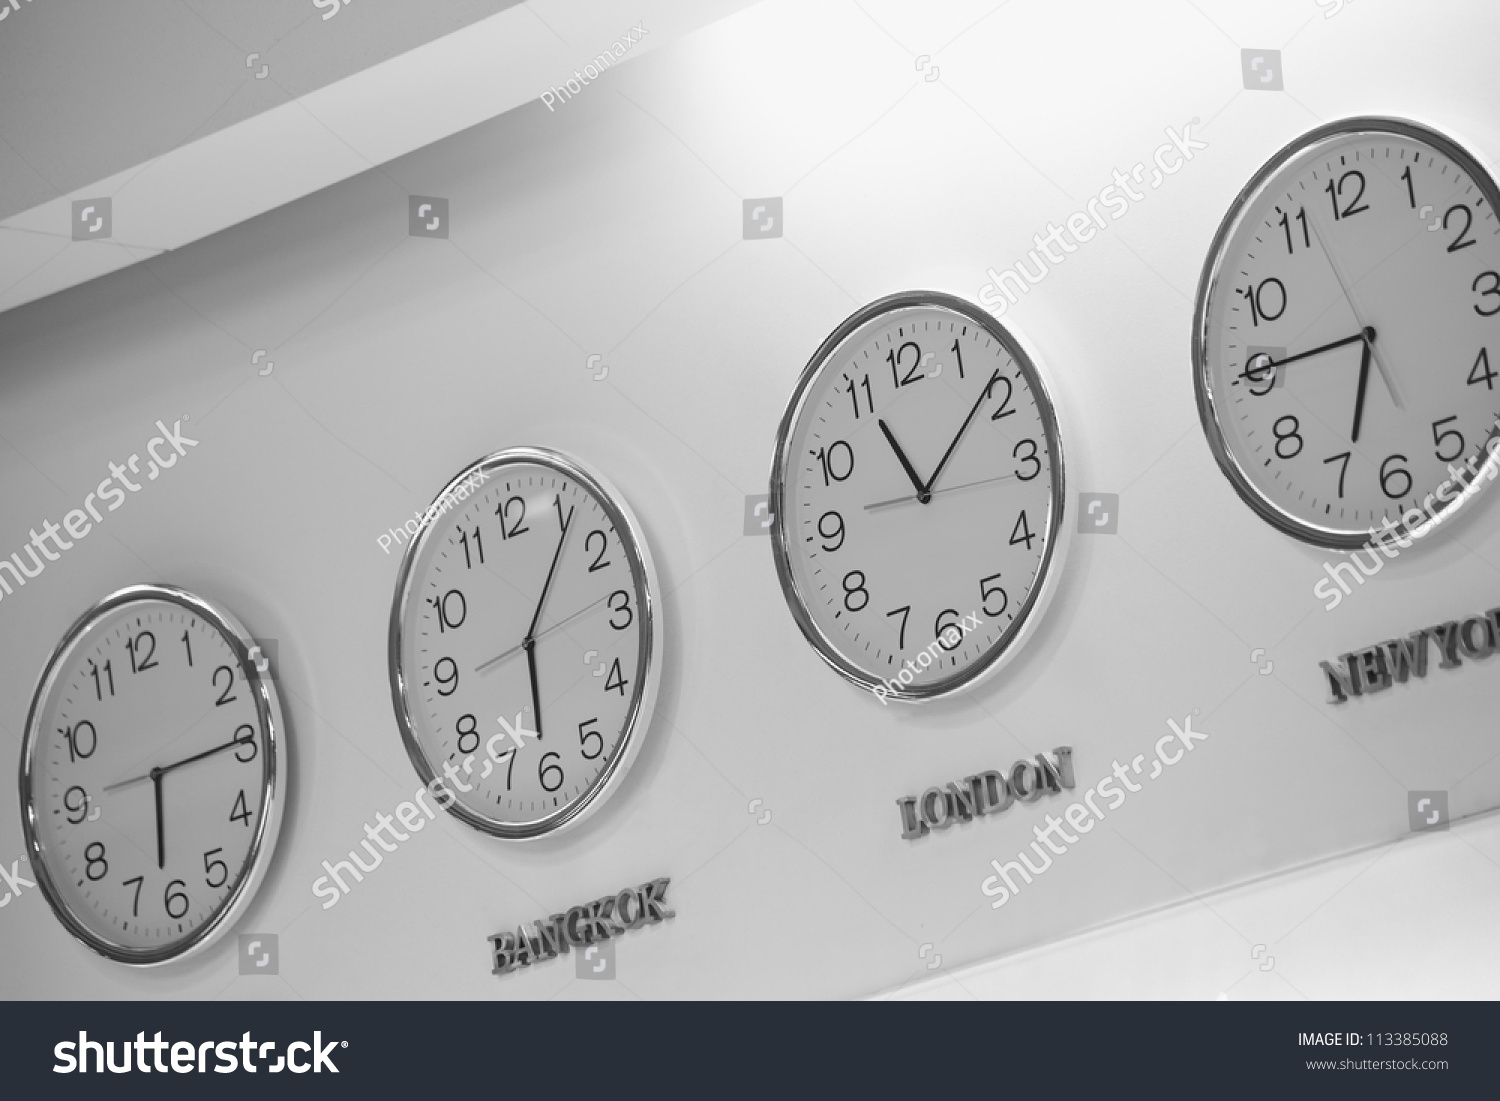 Watches Dial Plates Diferent Time Zones On The Wall Stock Photo ...